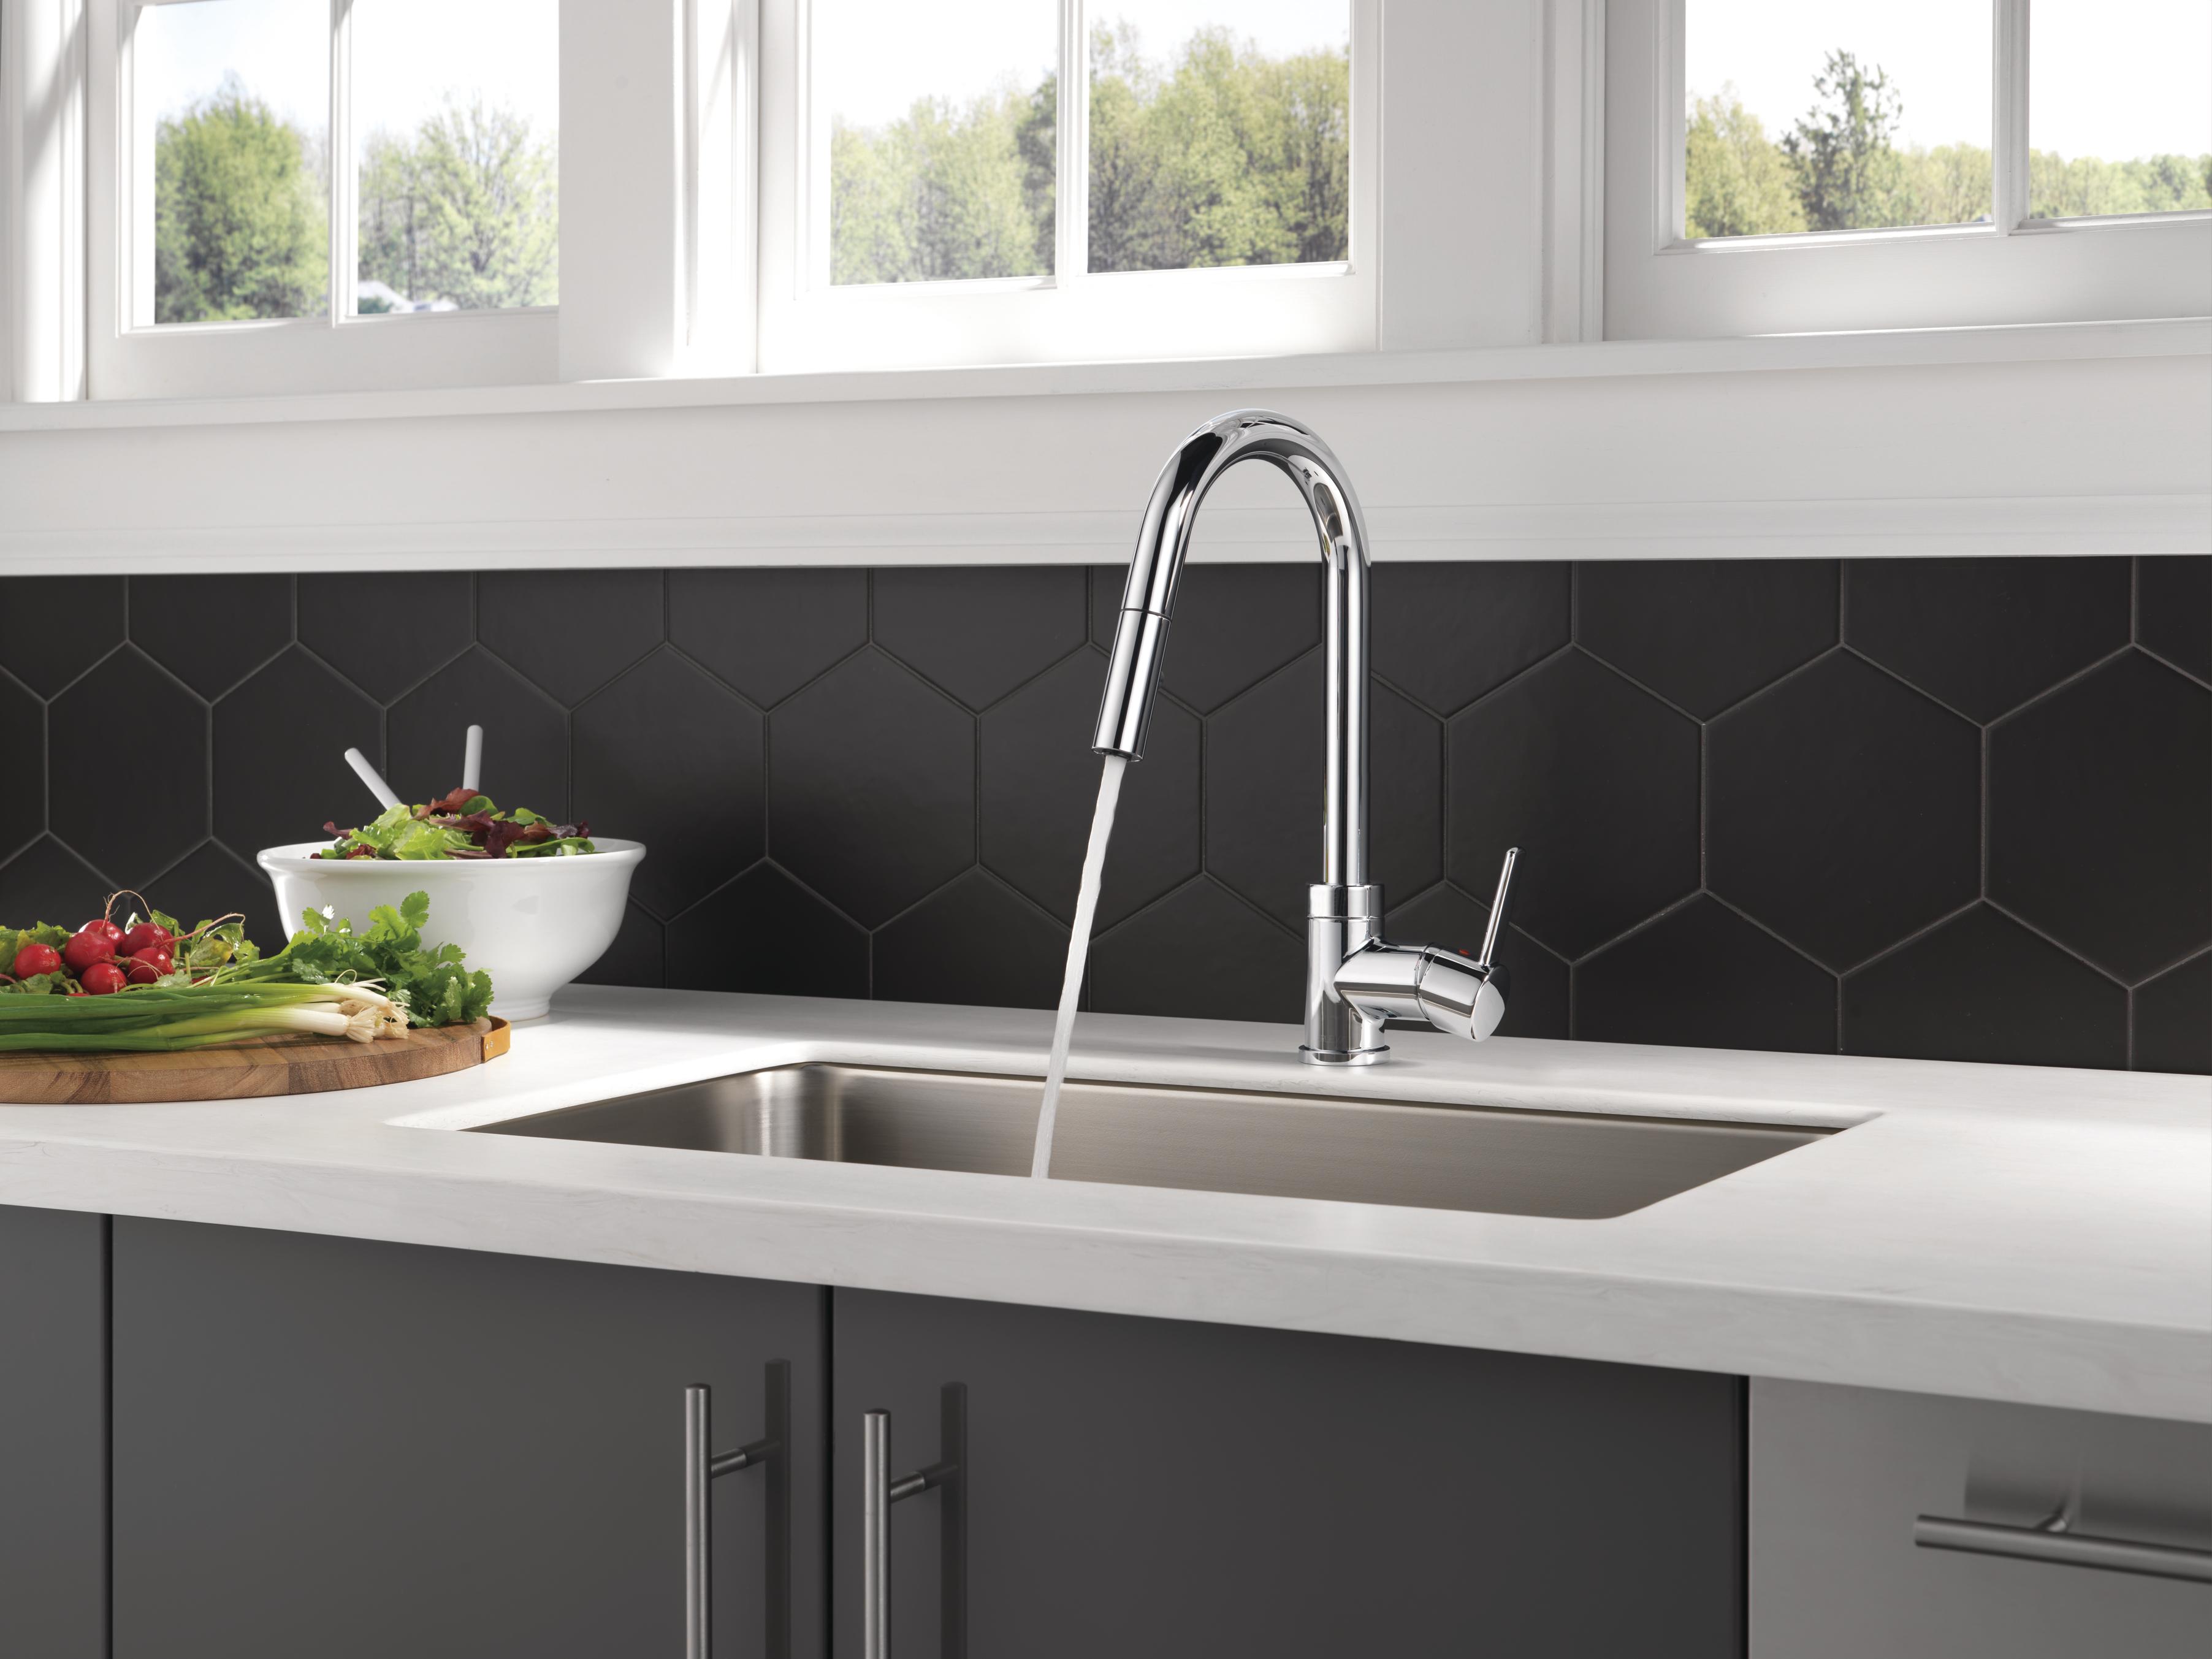 Peerless Precept Single Handle Pull-Down Sprayer Kitchen Faucet in Chrome P188152LF - image 3 of 15